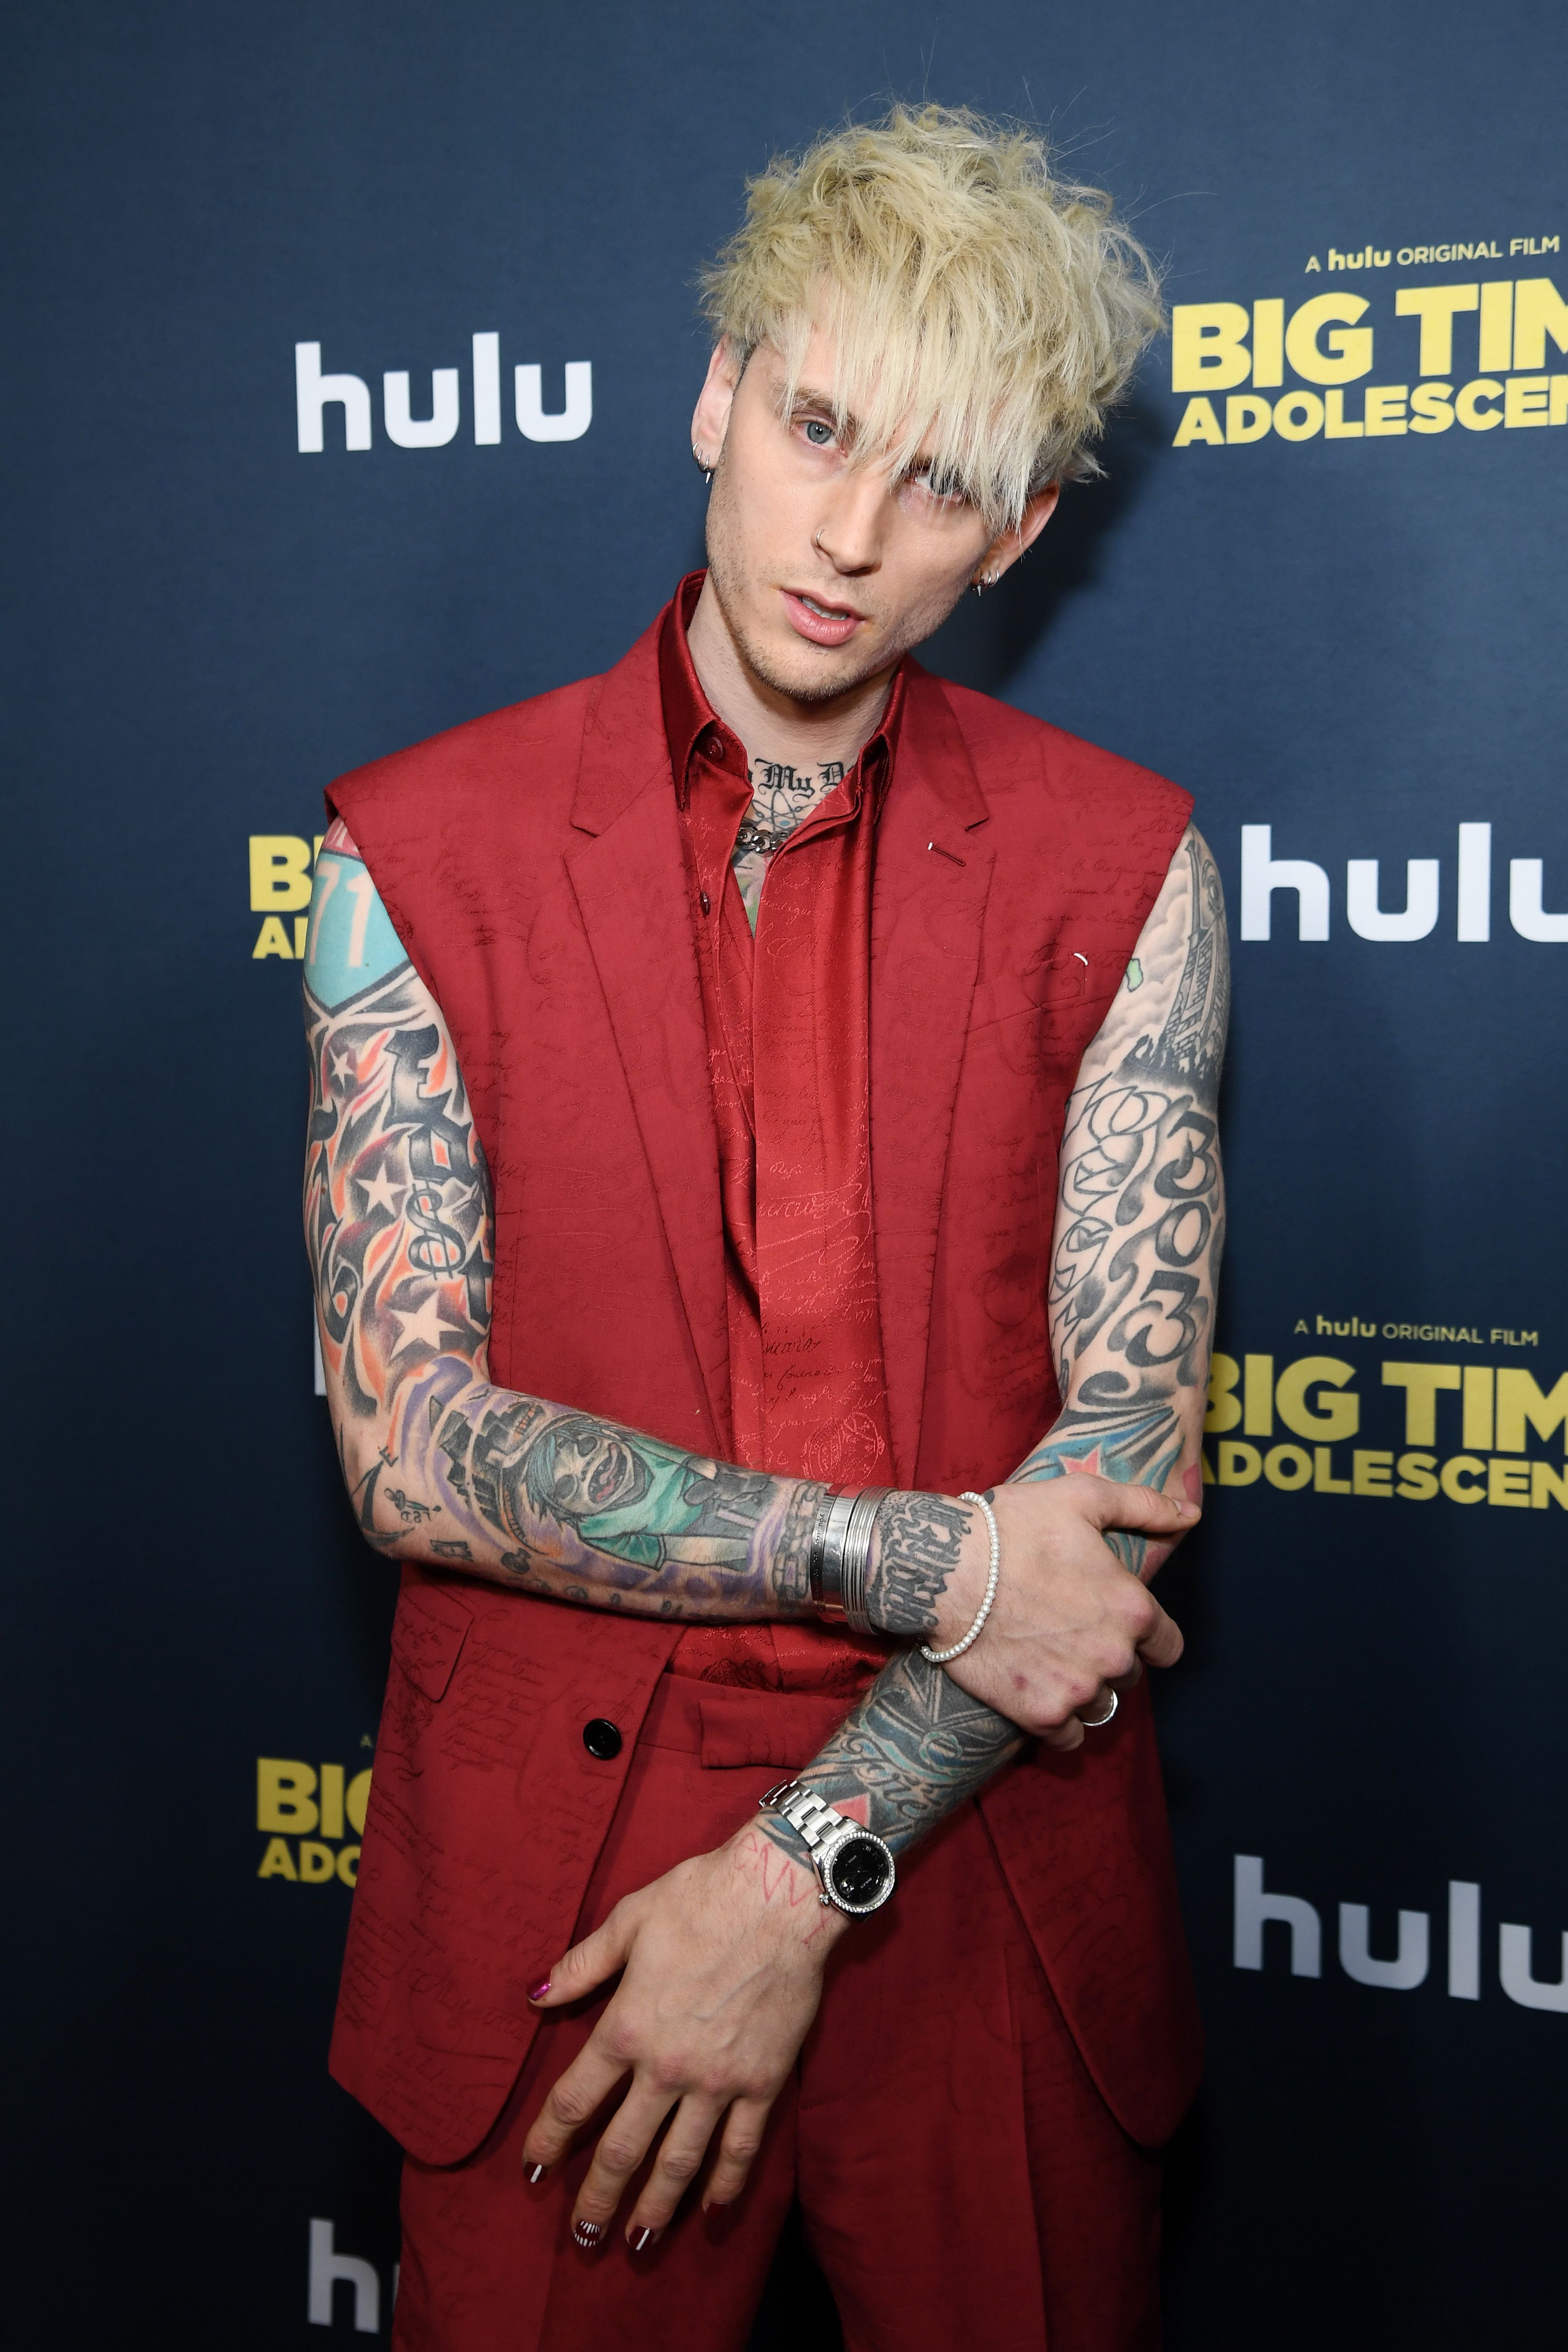 Machine Gun Kelly at the premiere of "Big Time Adolescence" in March 2020 in New York City | Source: Getty Images